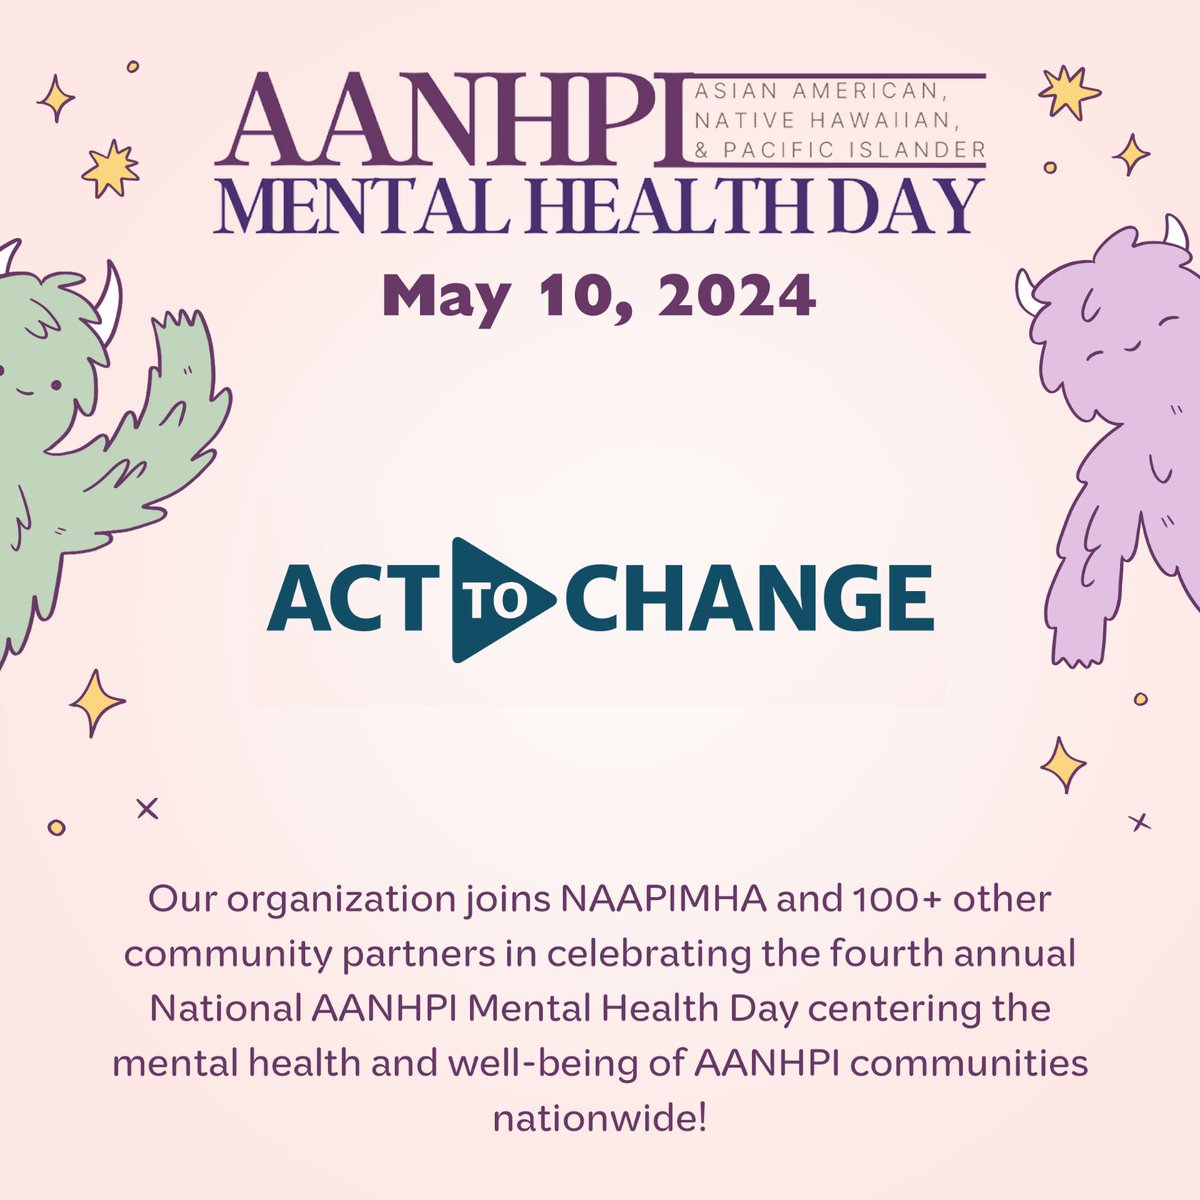 We are joining @NAAPIMHA in proclaiming May 10th as National AANHPI Mental Health Day. Marked during #AANHPIHeritageMonth and #MentalHealthAwarenessMonth, this day is a celebration of #mentalhealth visibility, resilience, and community care. naapimha.org/aanhpimentalhe…